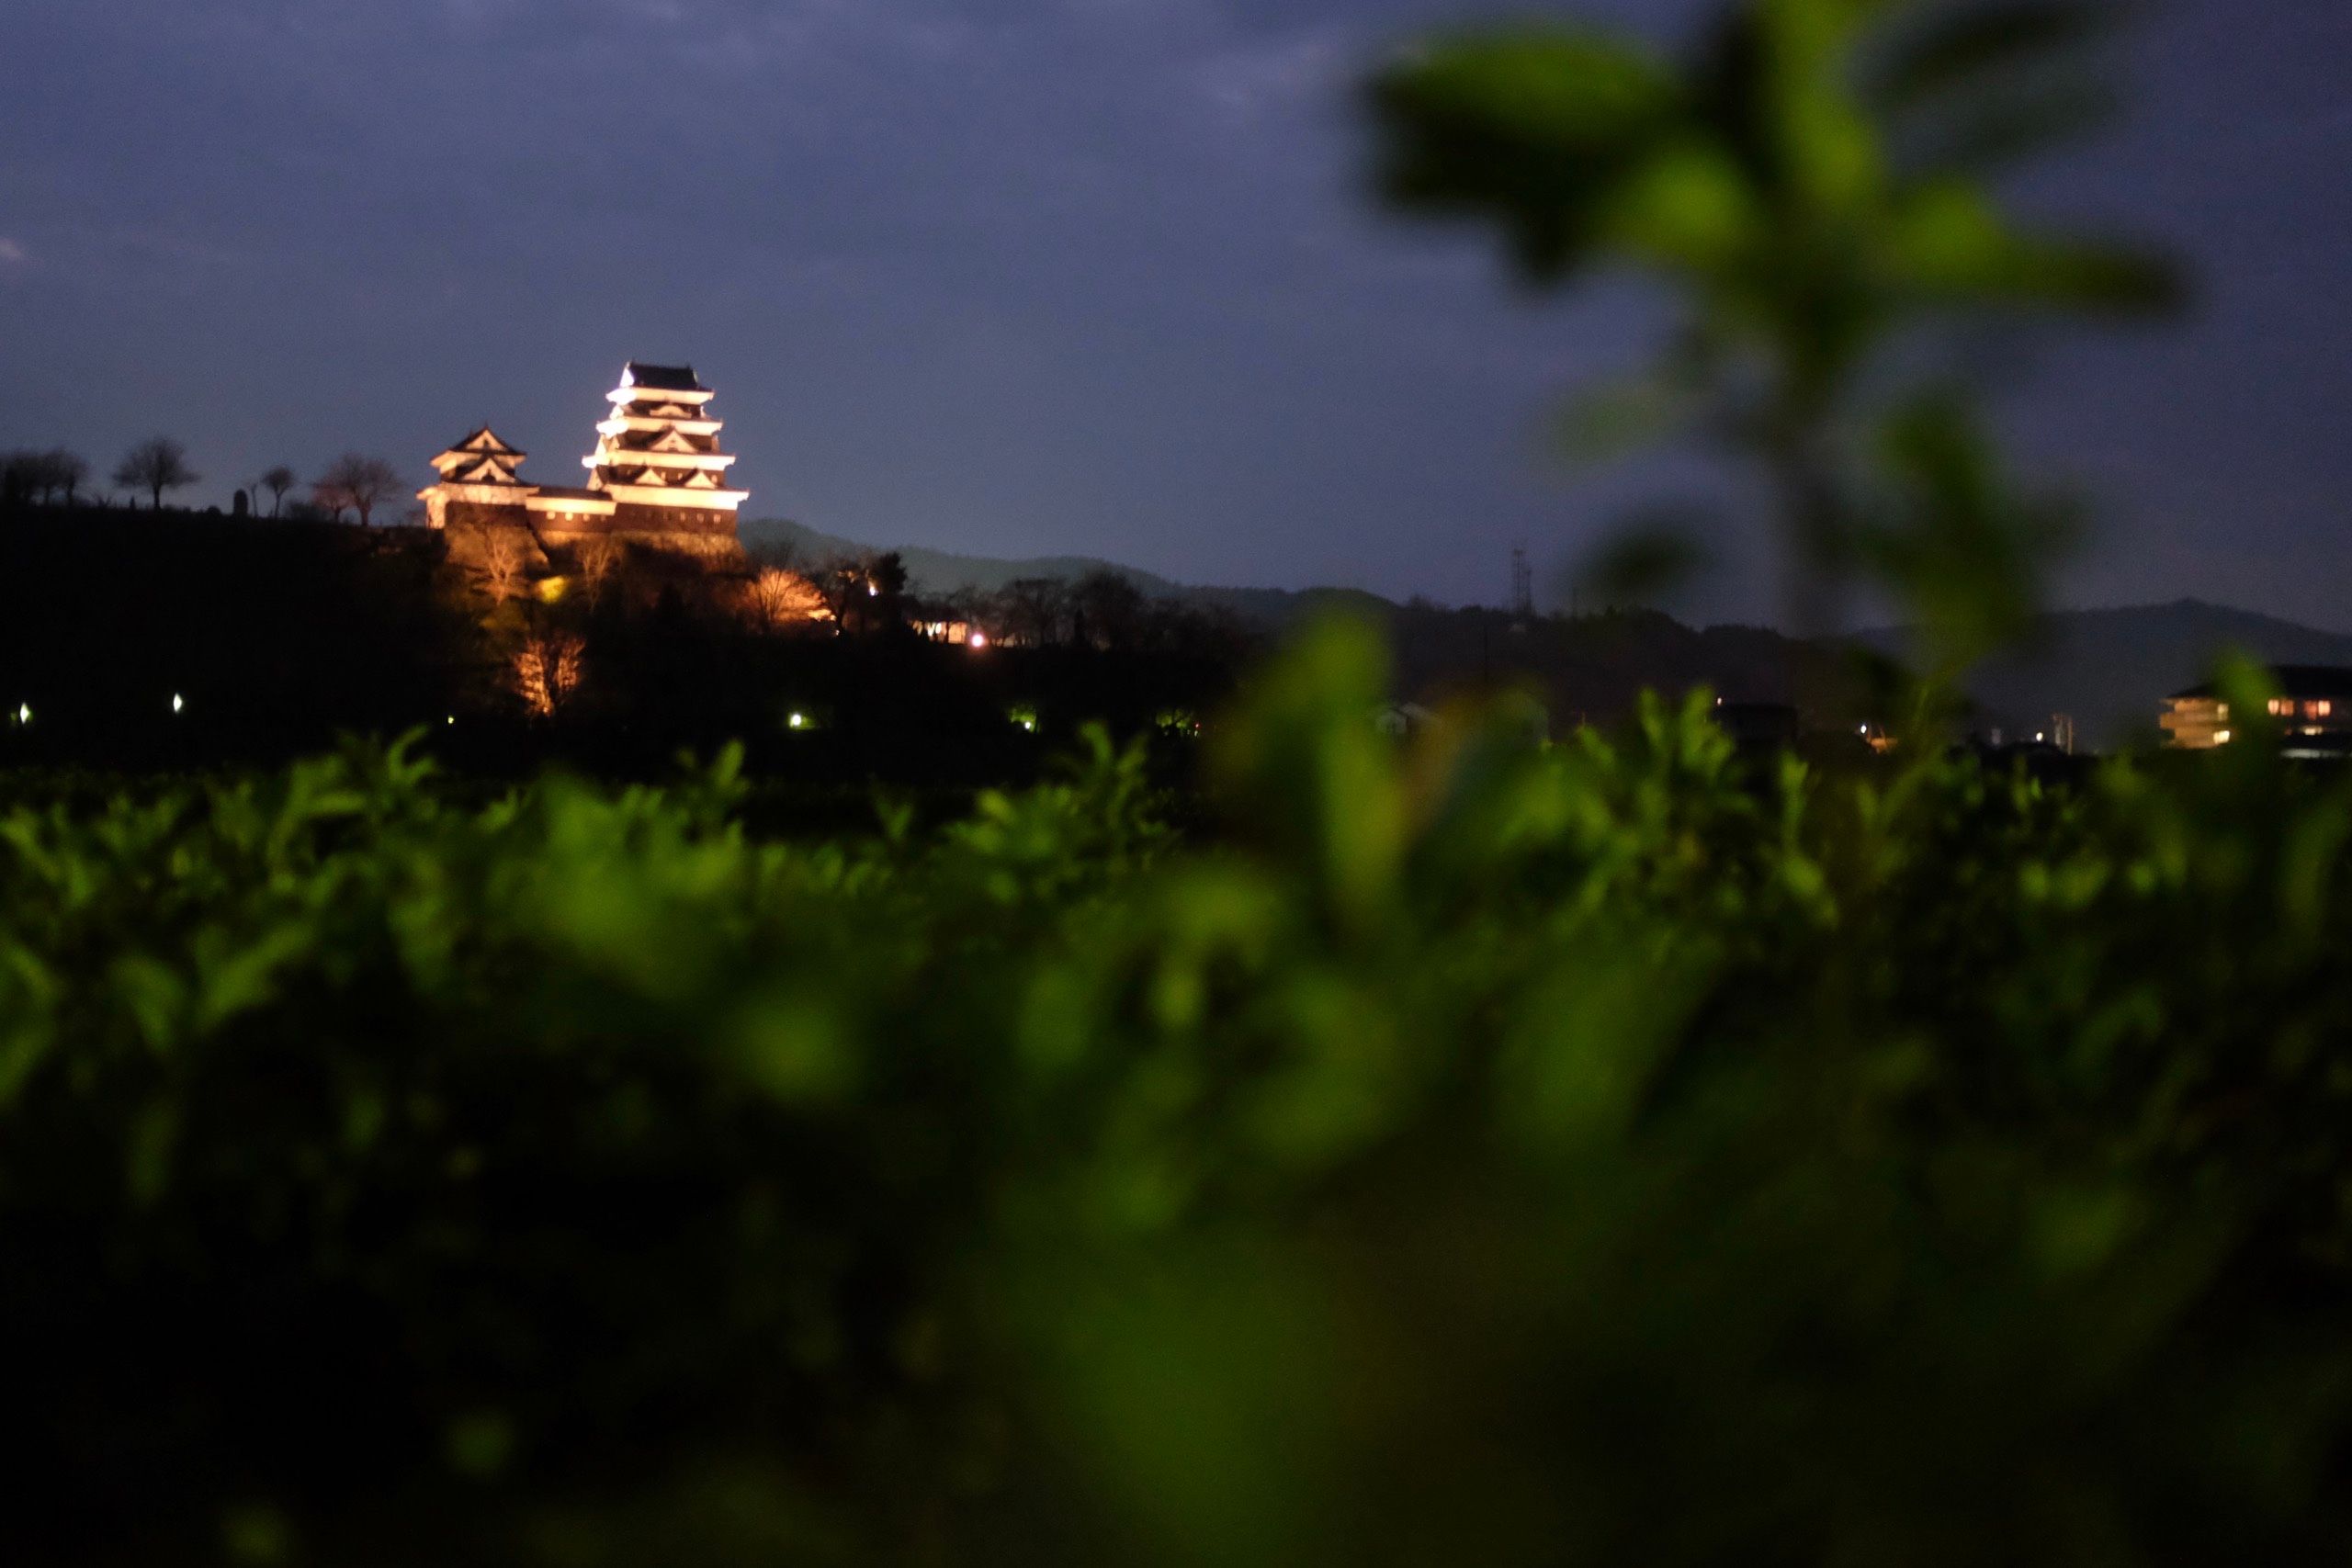 In the medium distance, a medieval Japanese castle is lit up against the night sky.